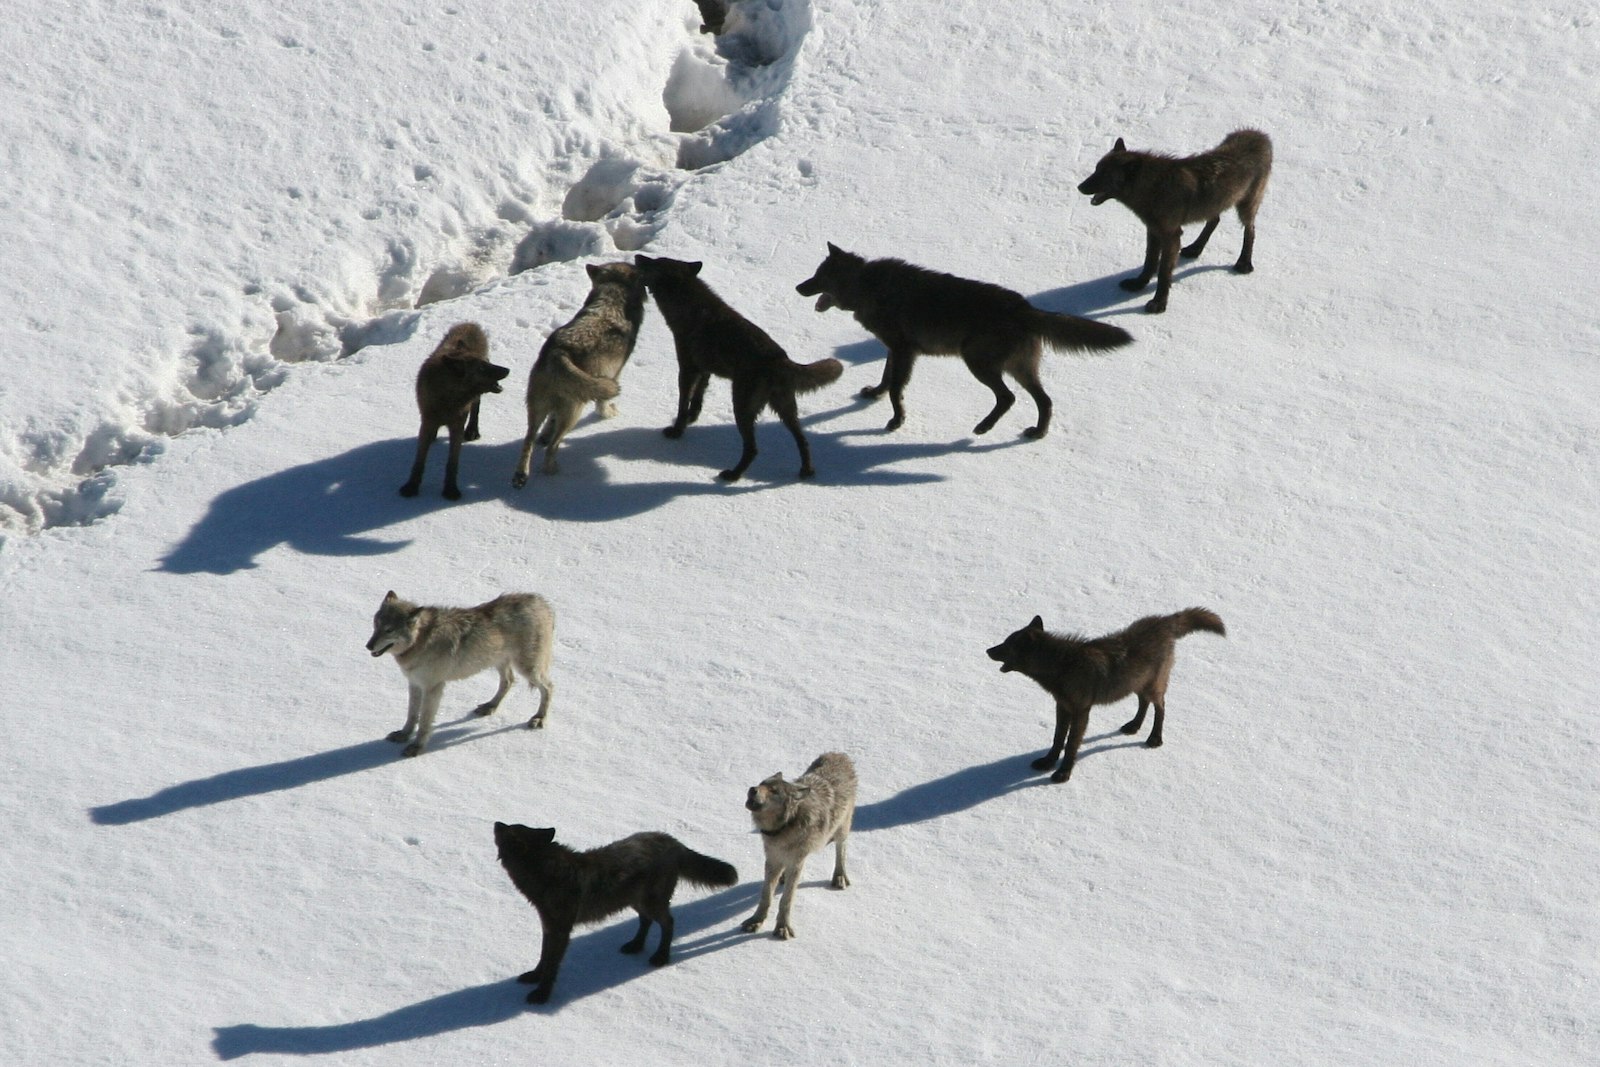 Nine wolves interact on top of crusty snow.